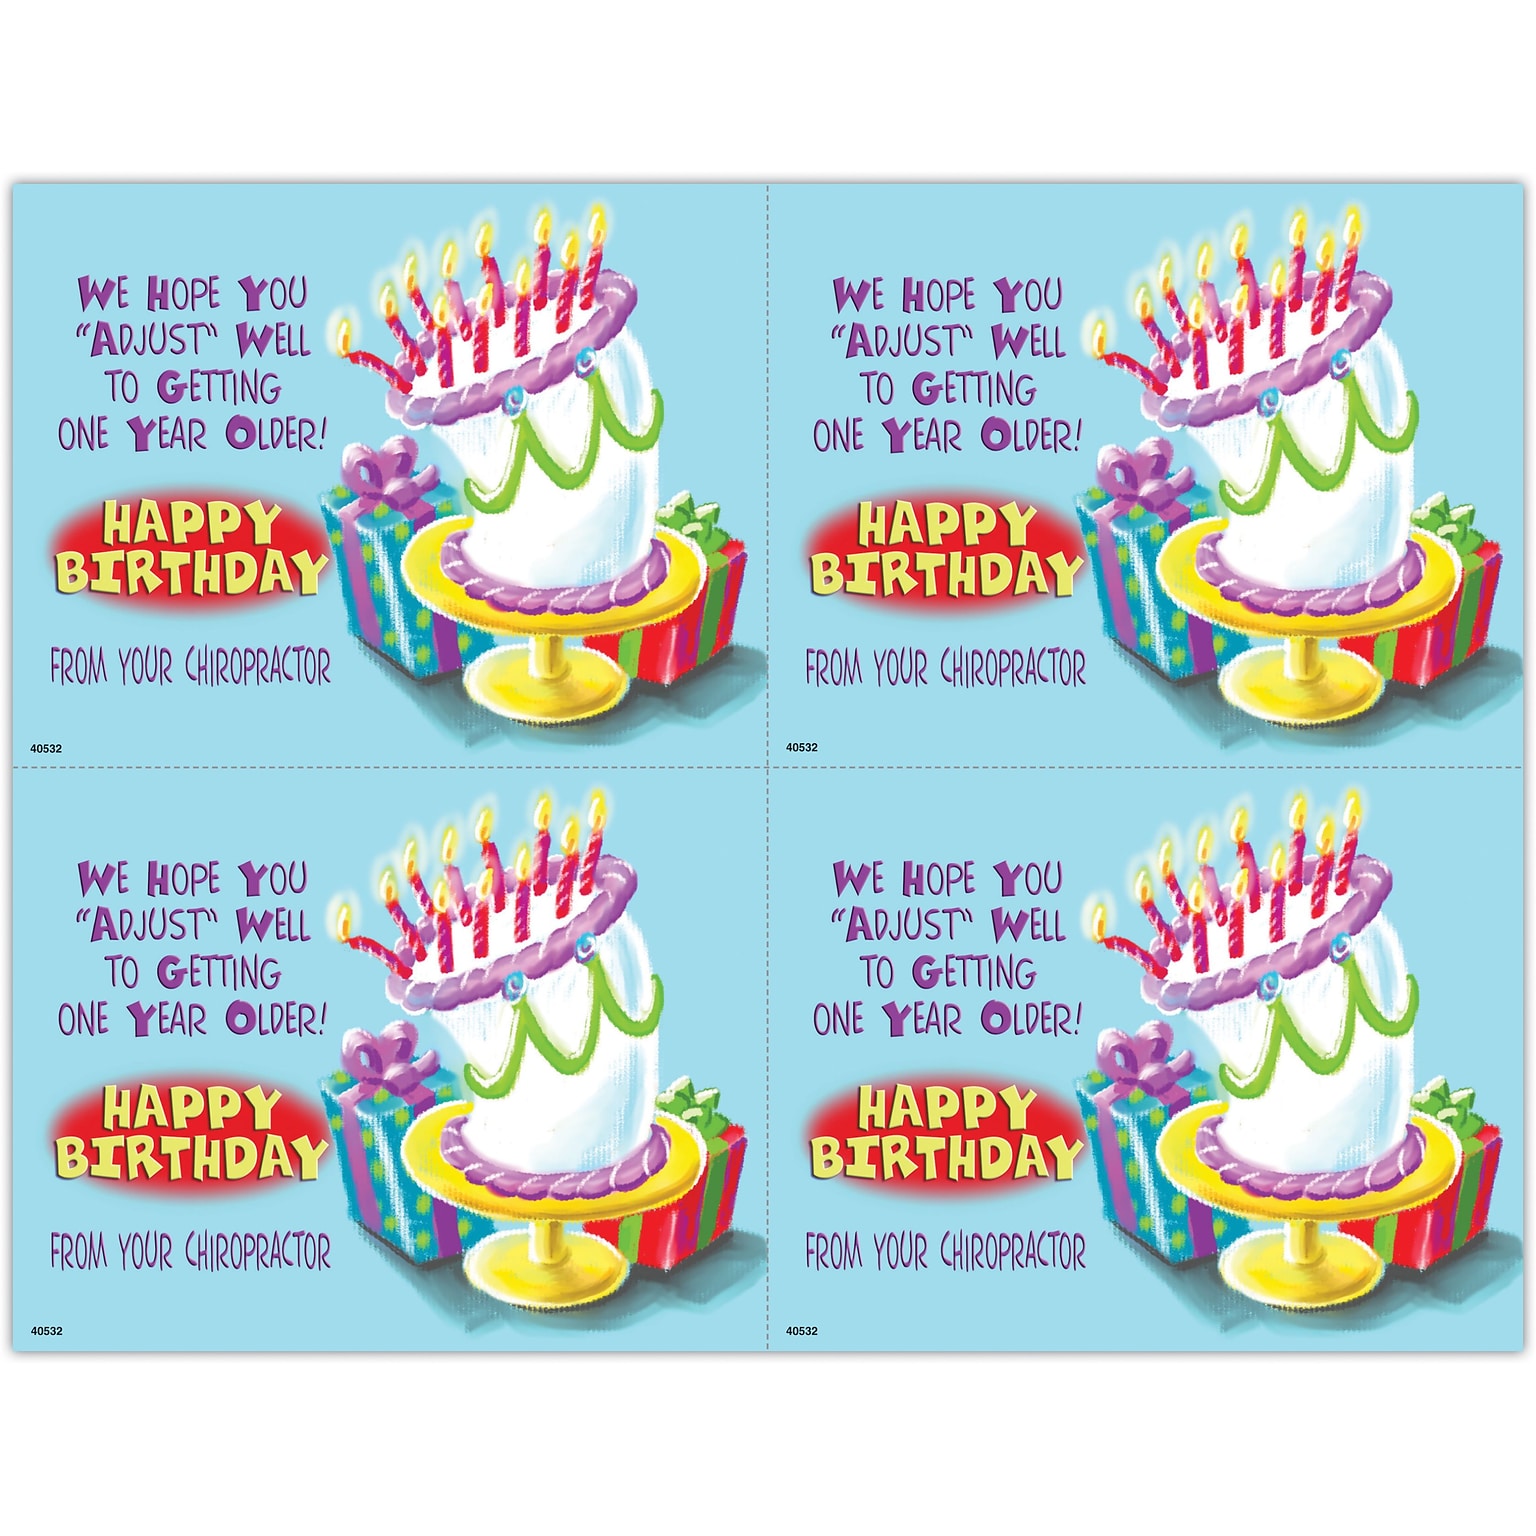 Humorous Postcards; for Laser Printer; Cartoon Cake with Presents, 100/Pk